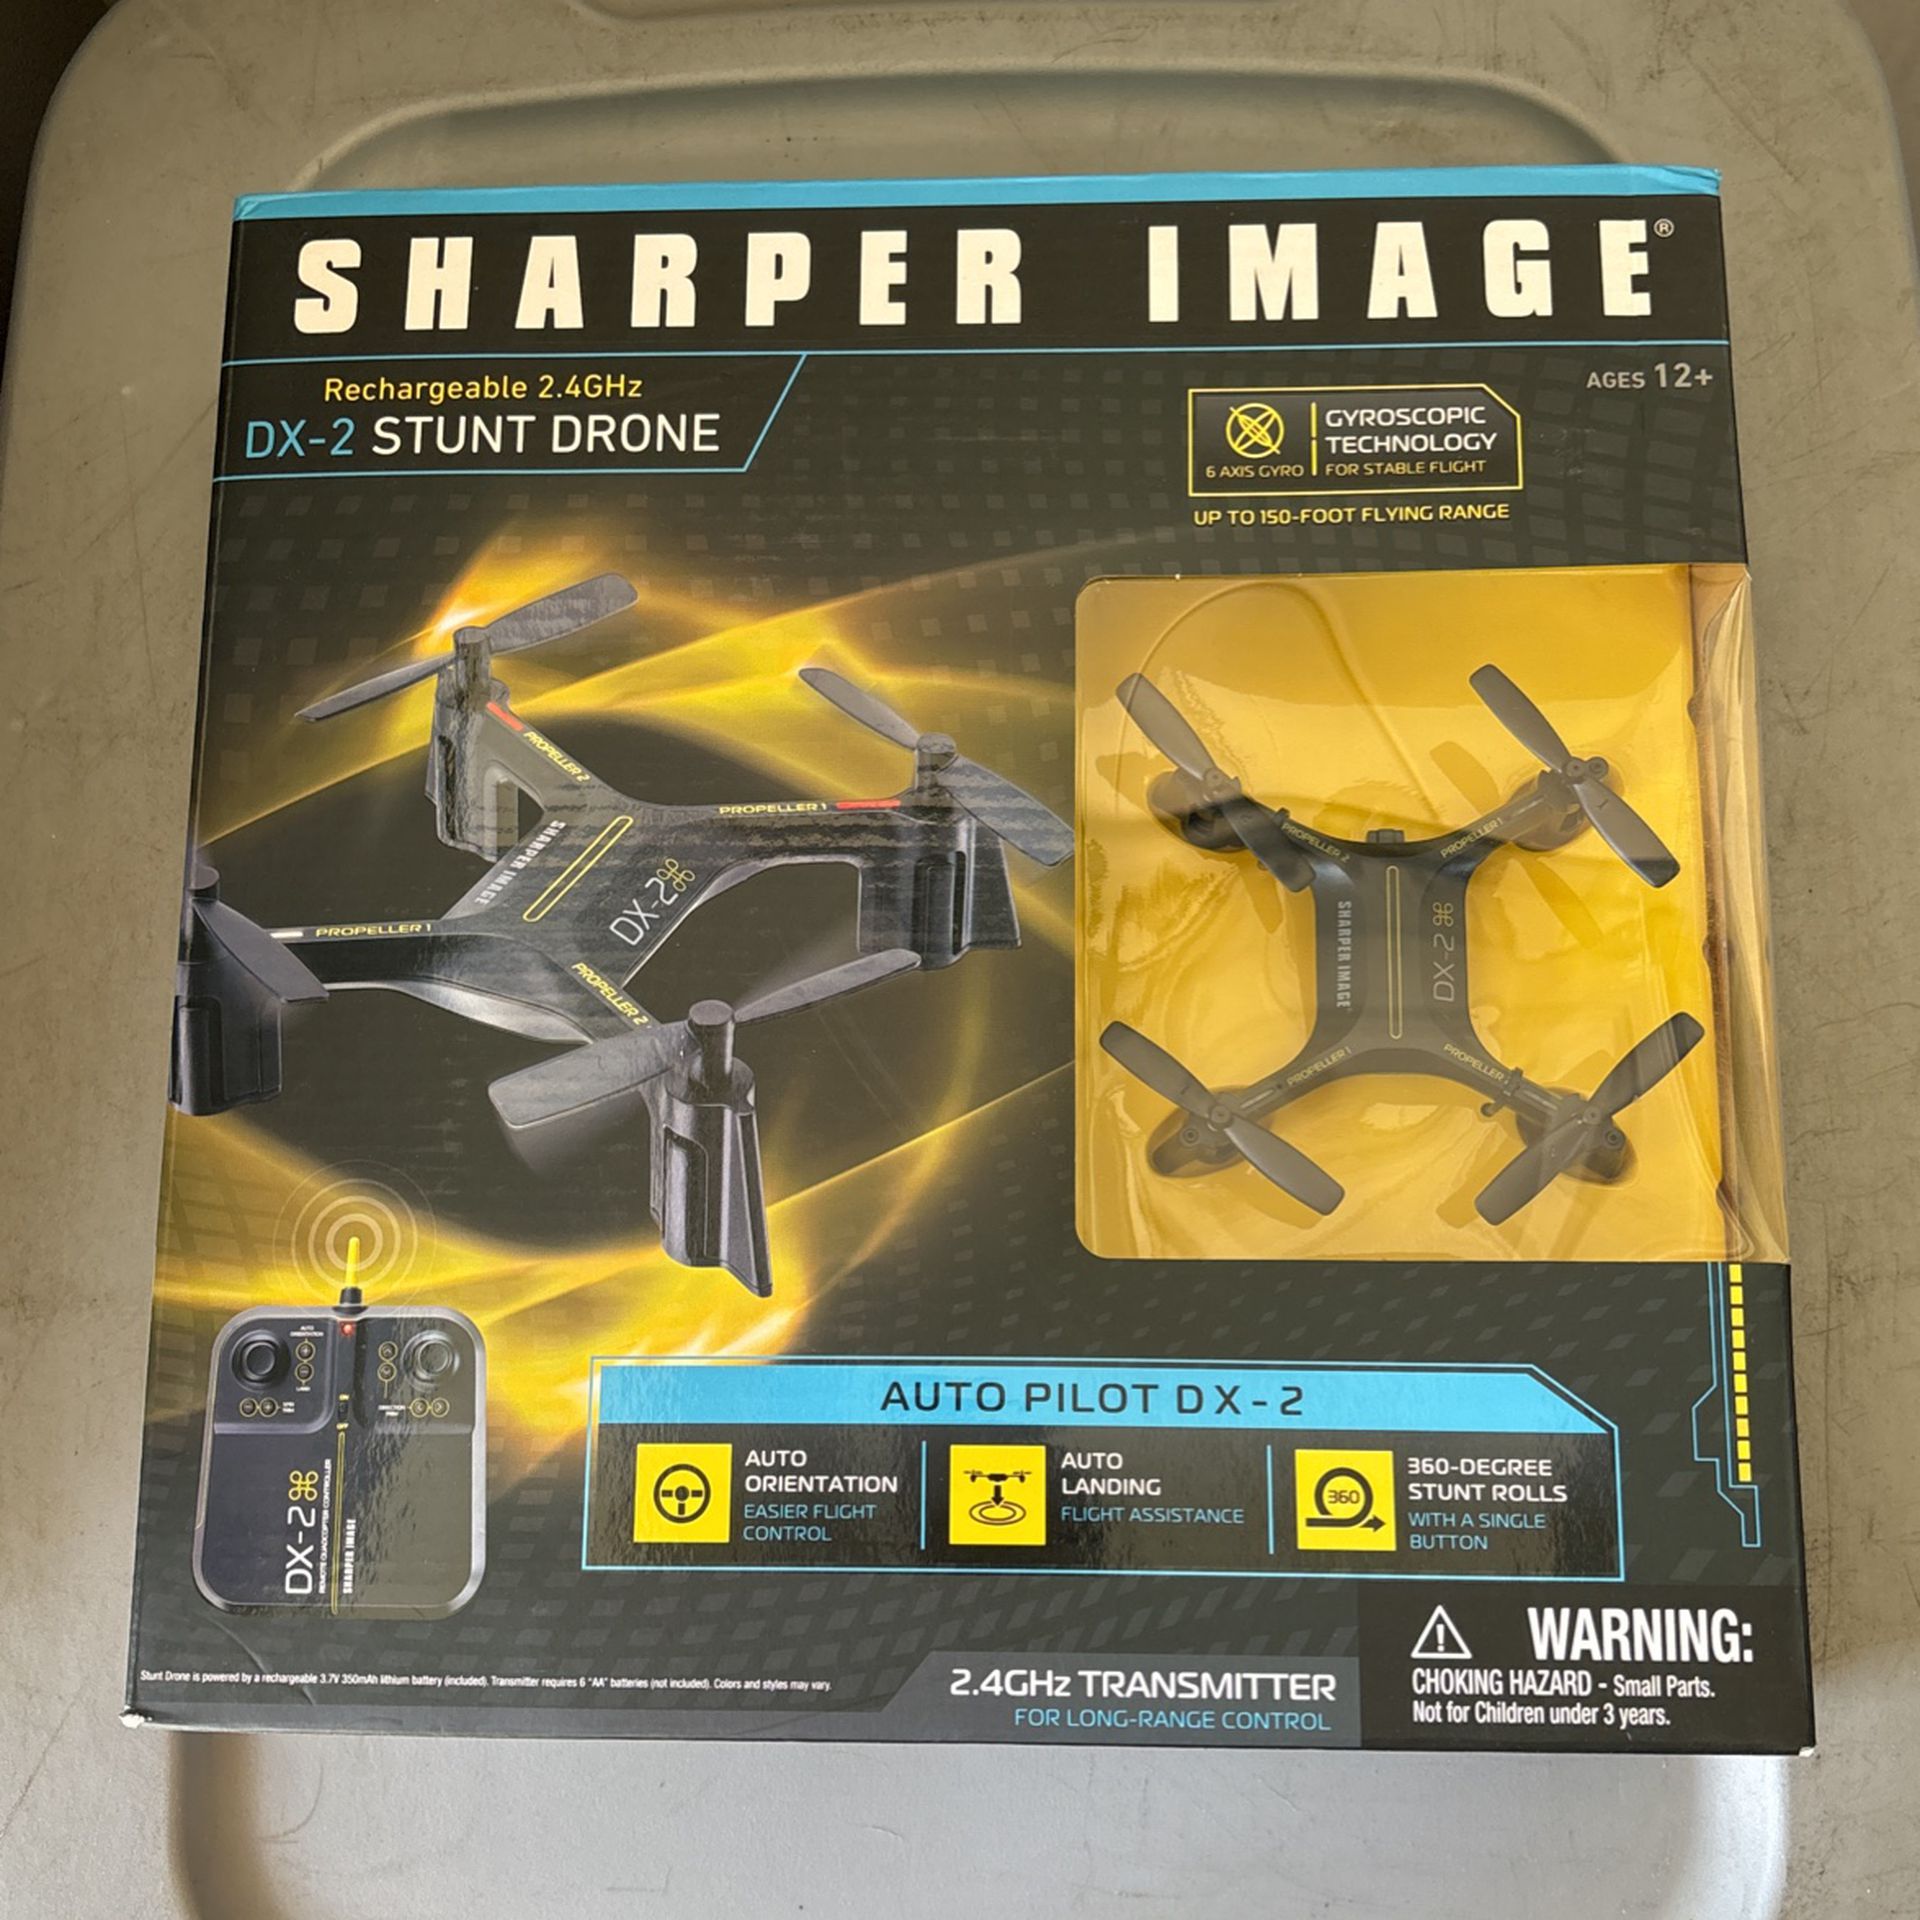 Sharper Image Rechargeable 2.4 GHz DX-2 Stunt Drone